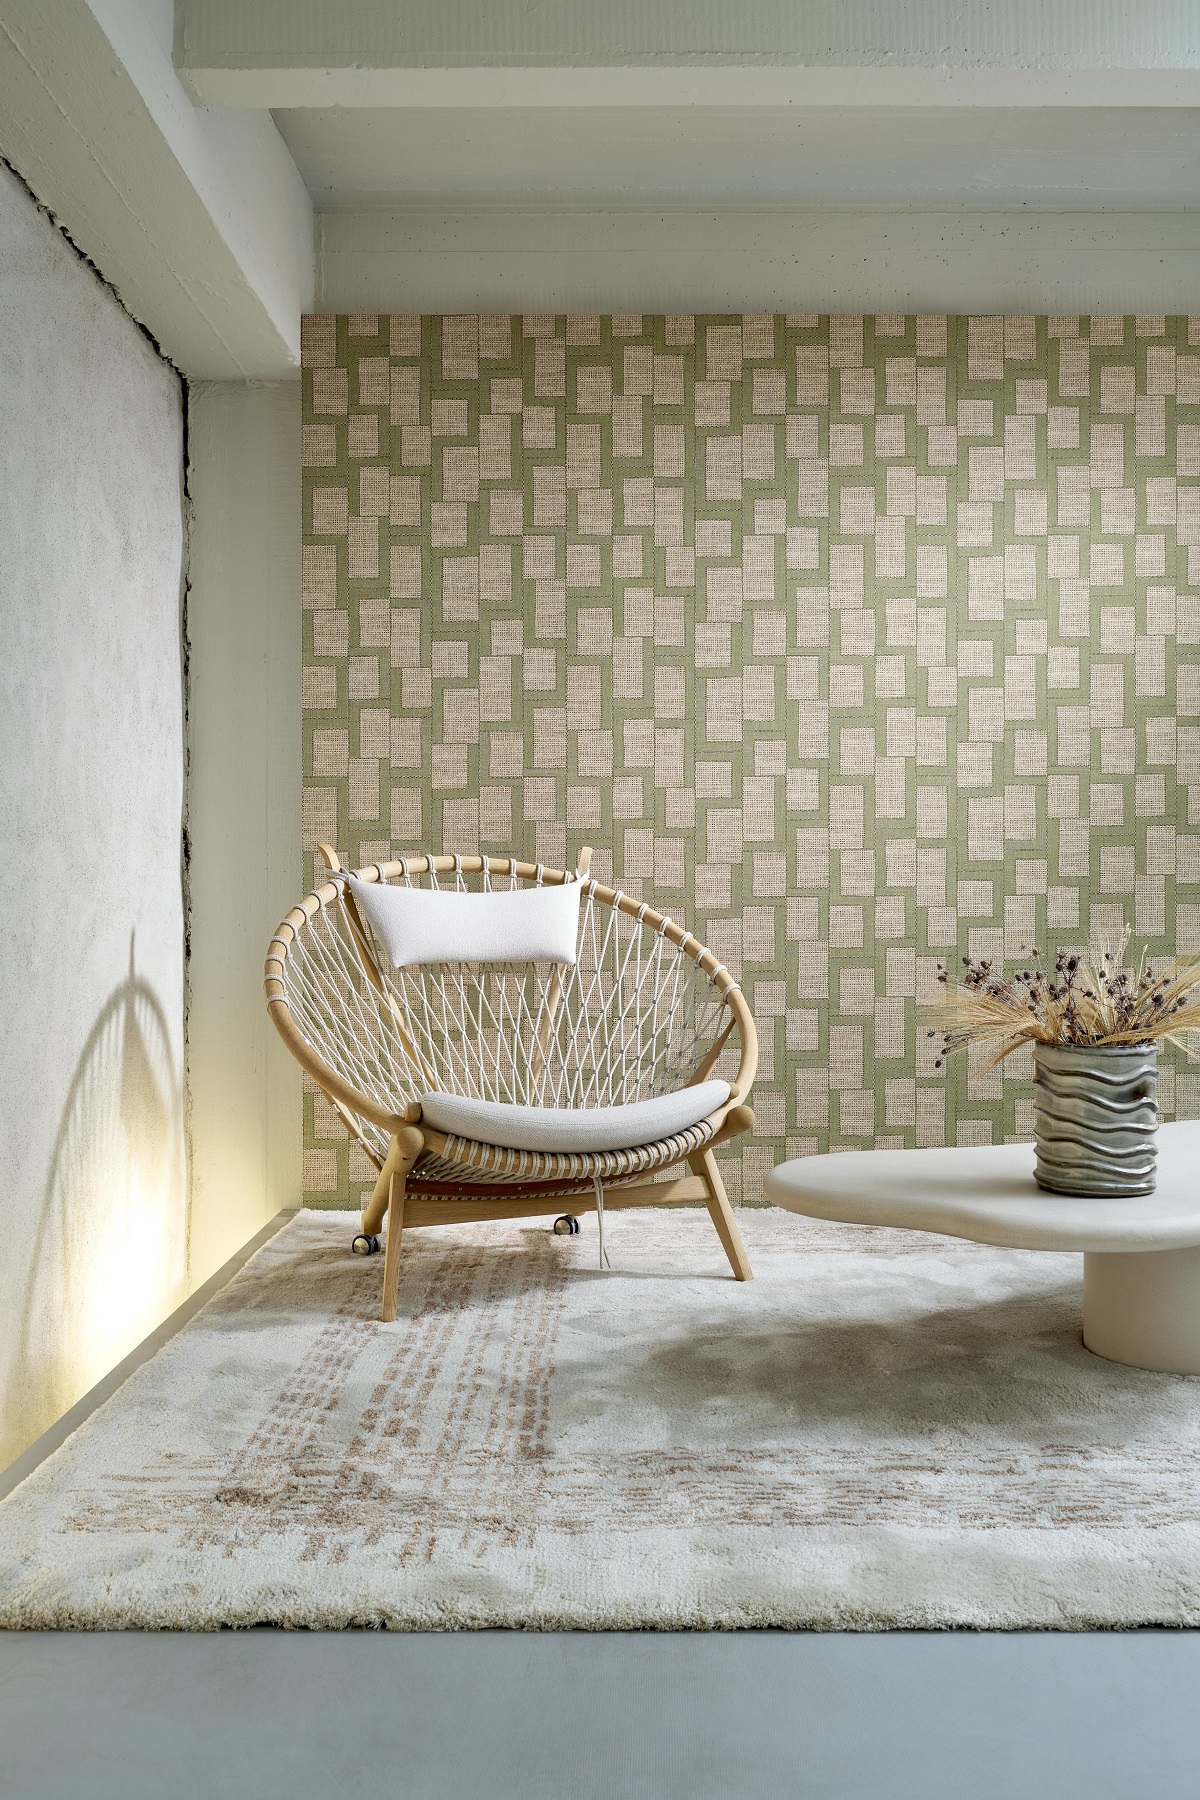 hessian inspired wallcovering behind wicker globe chair